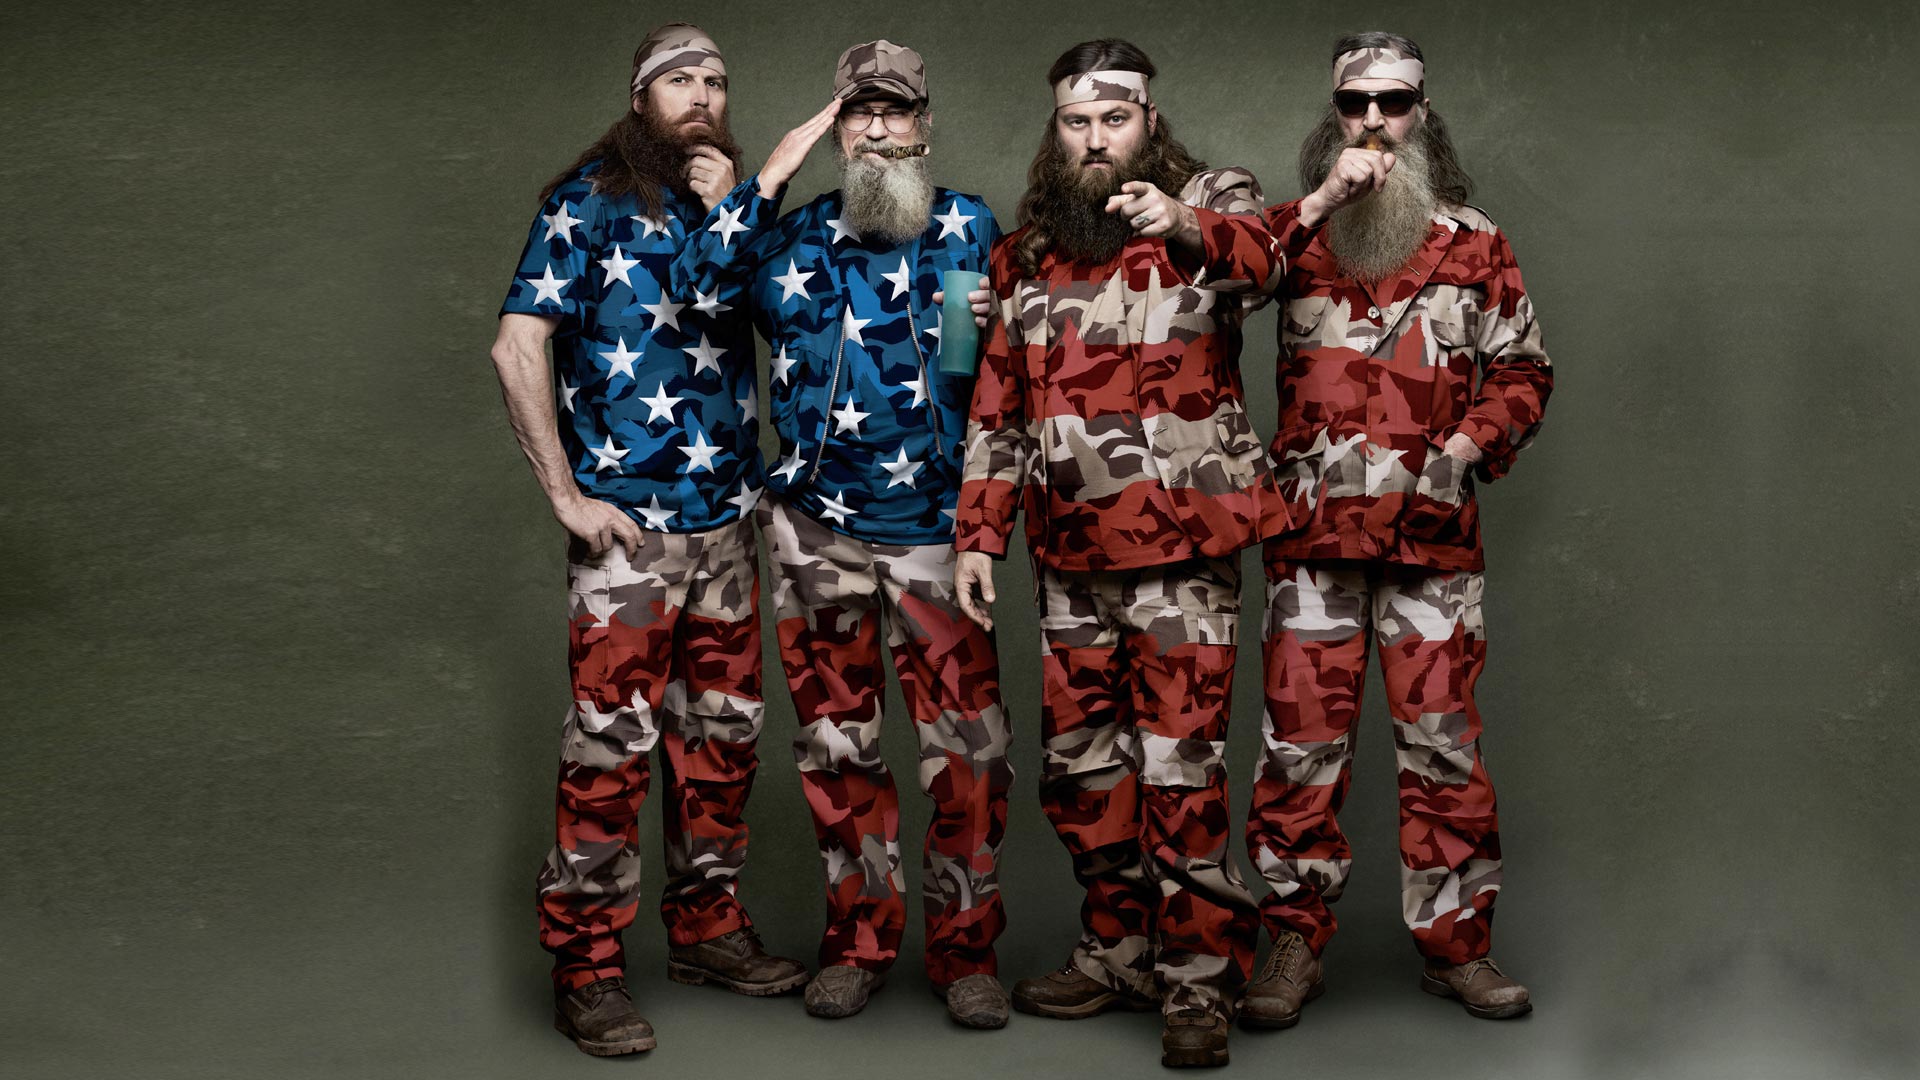 Catch up on season 4 of Duck Dynasty, only on A&E. Get exclusive videos...